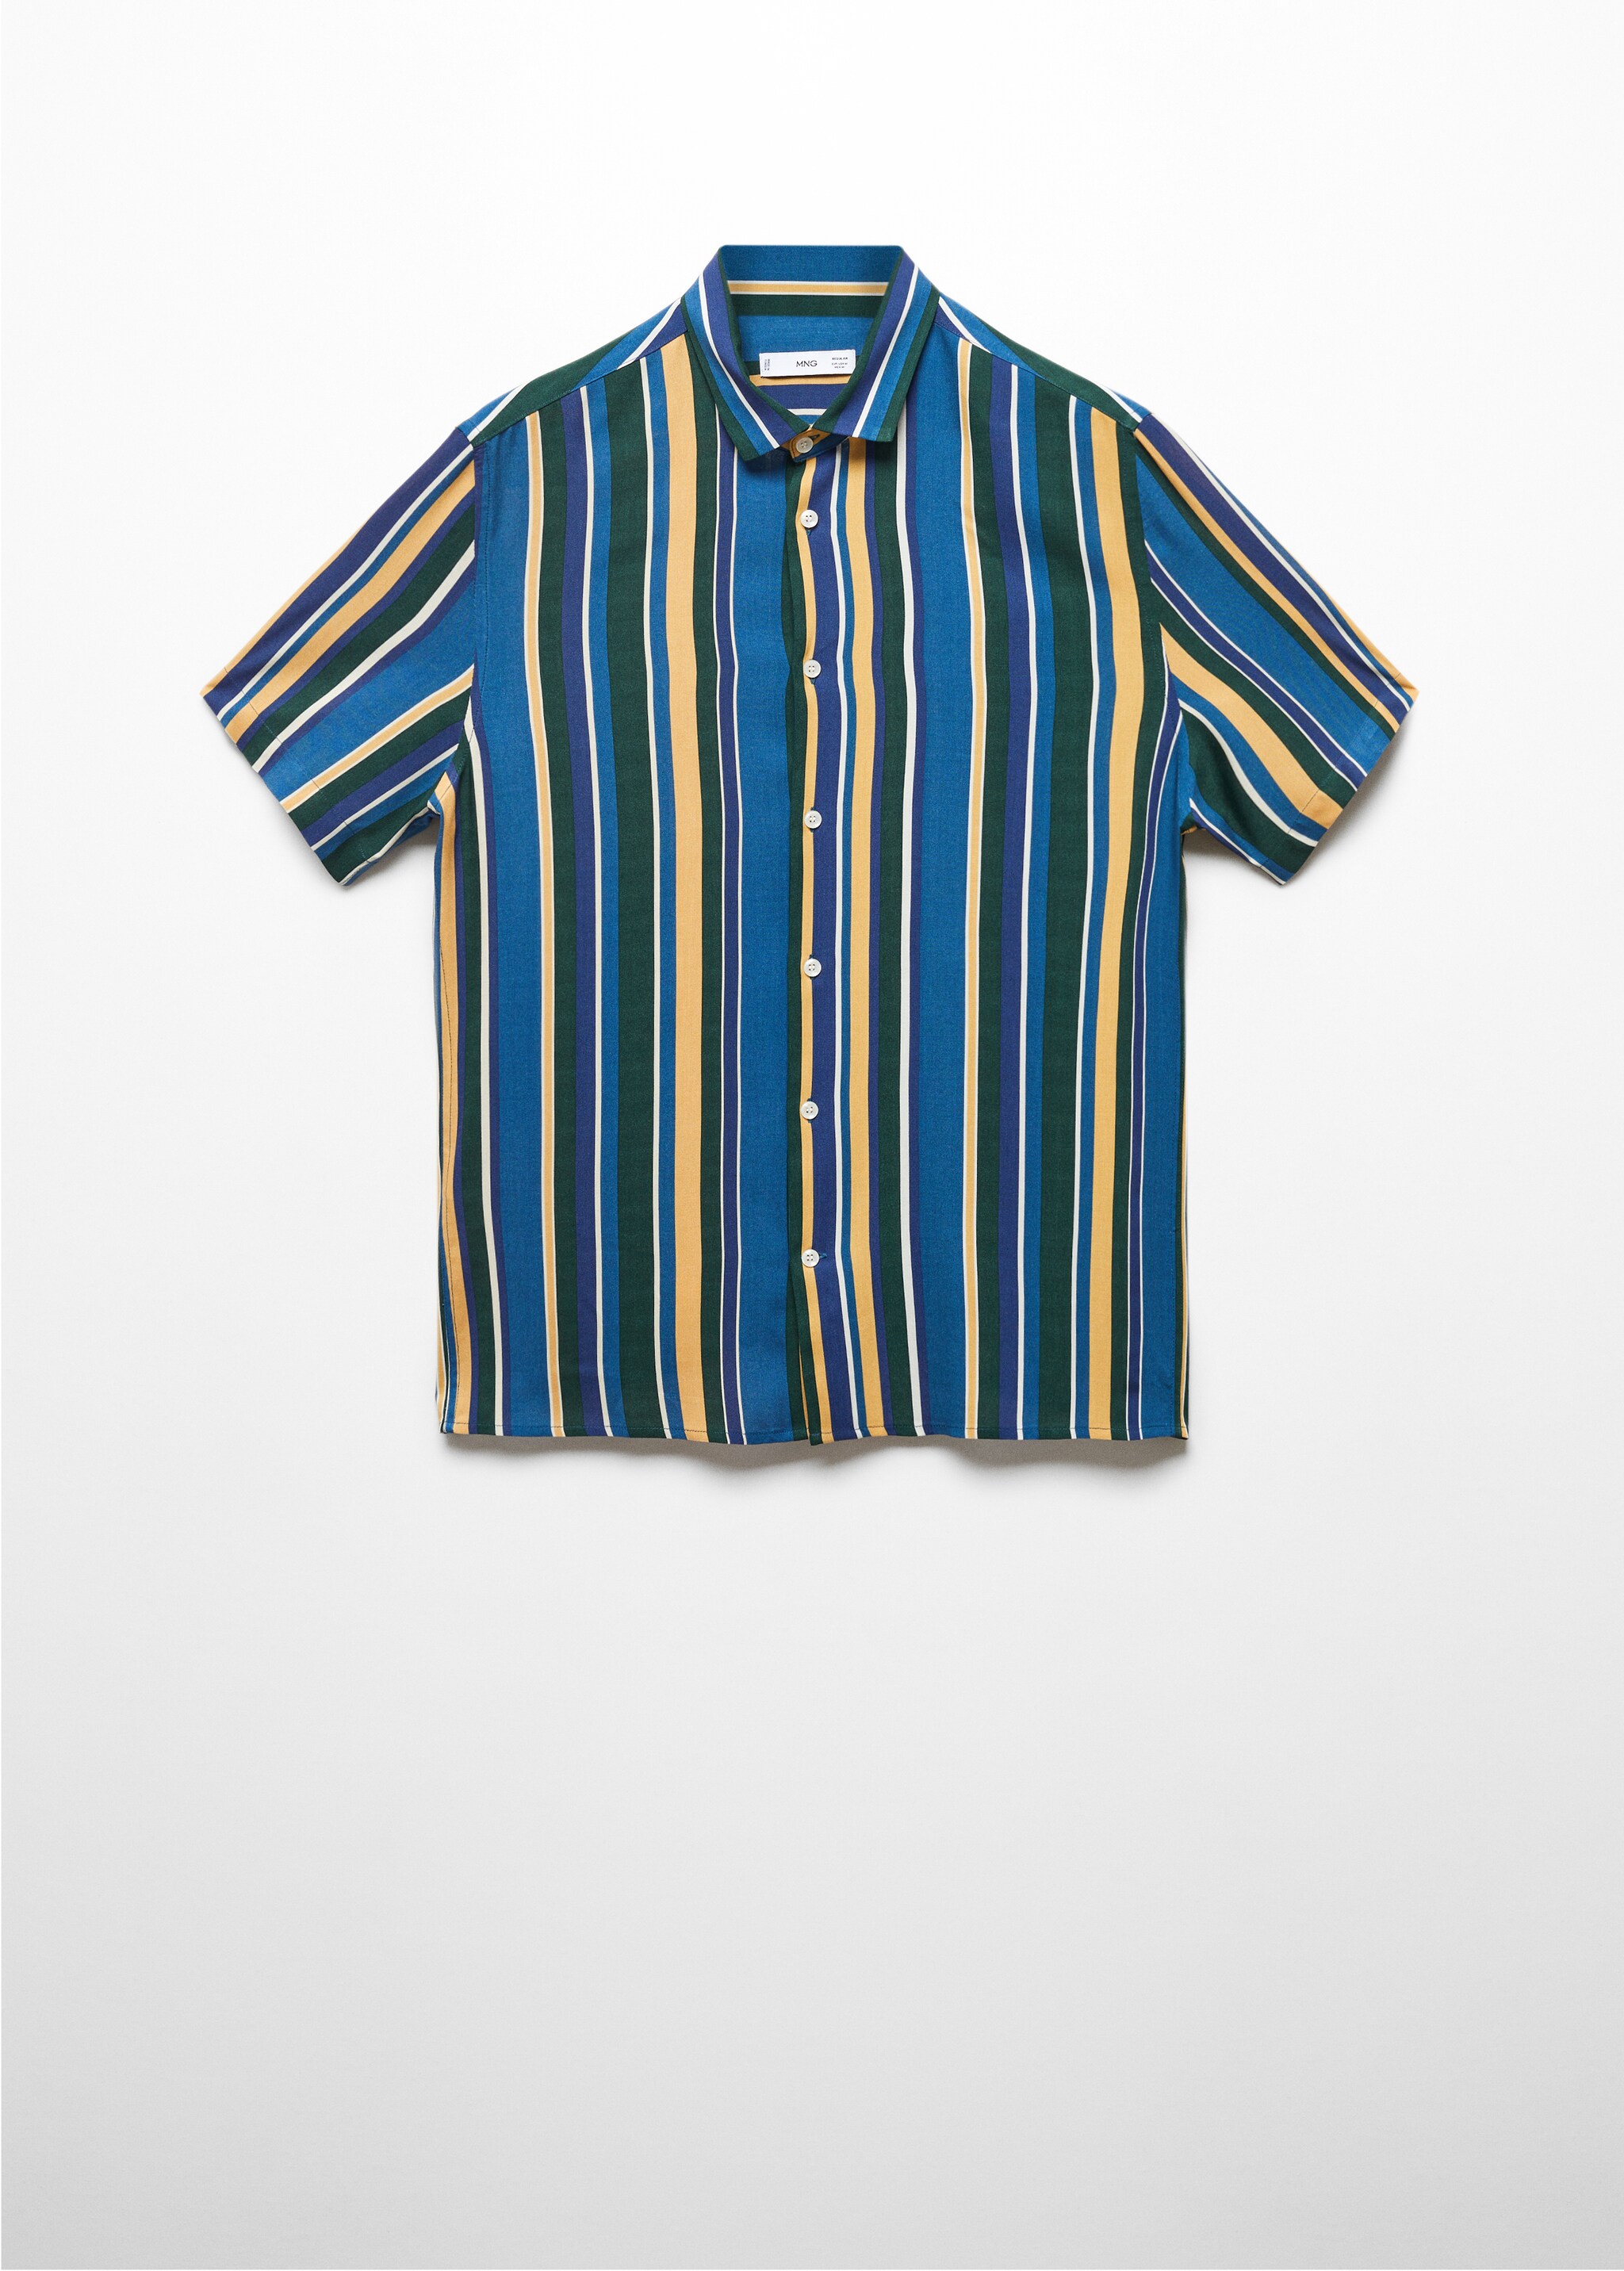 Short sleeve striped shirt - Article without model